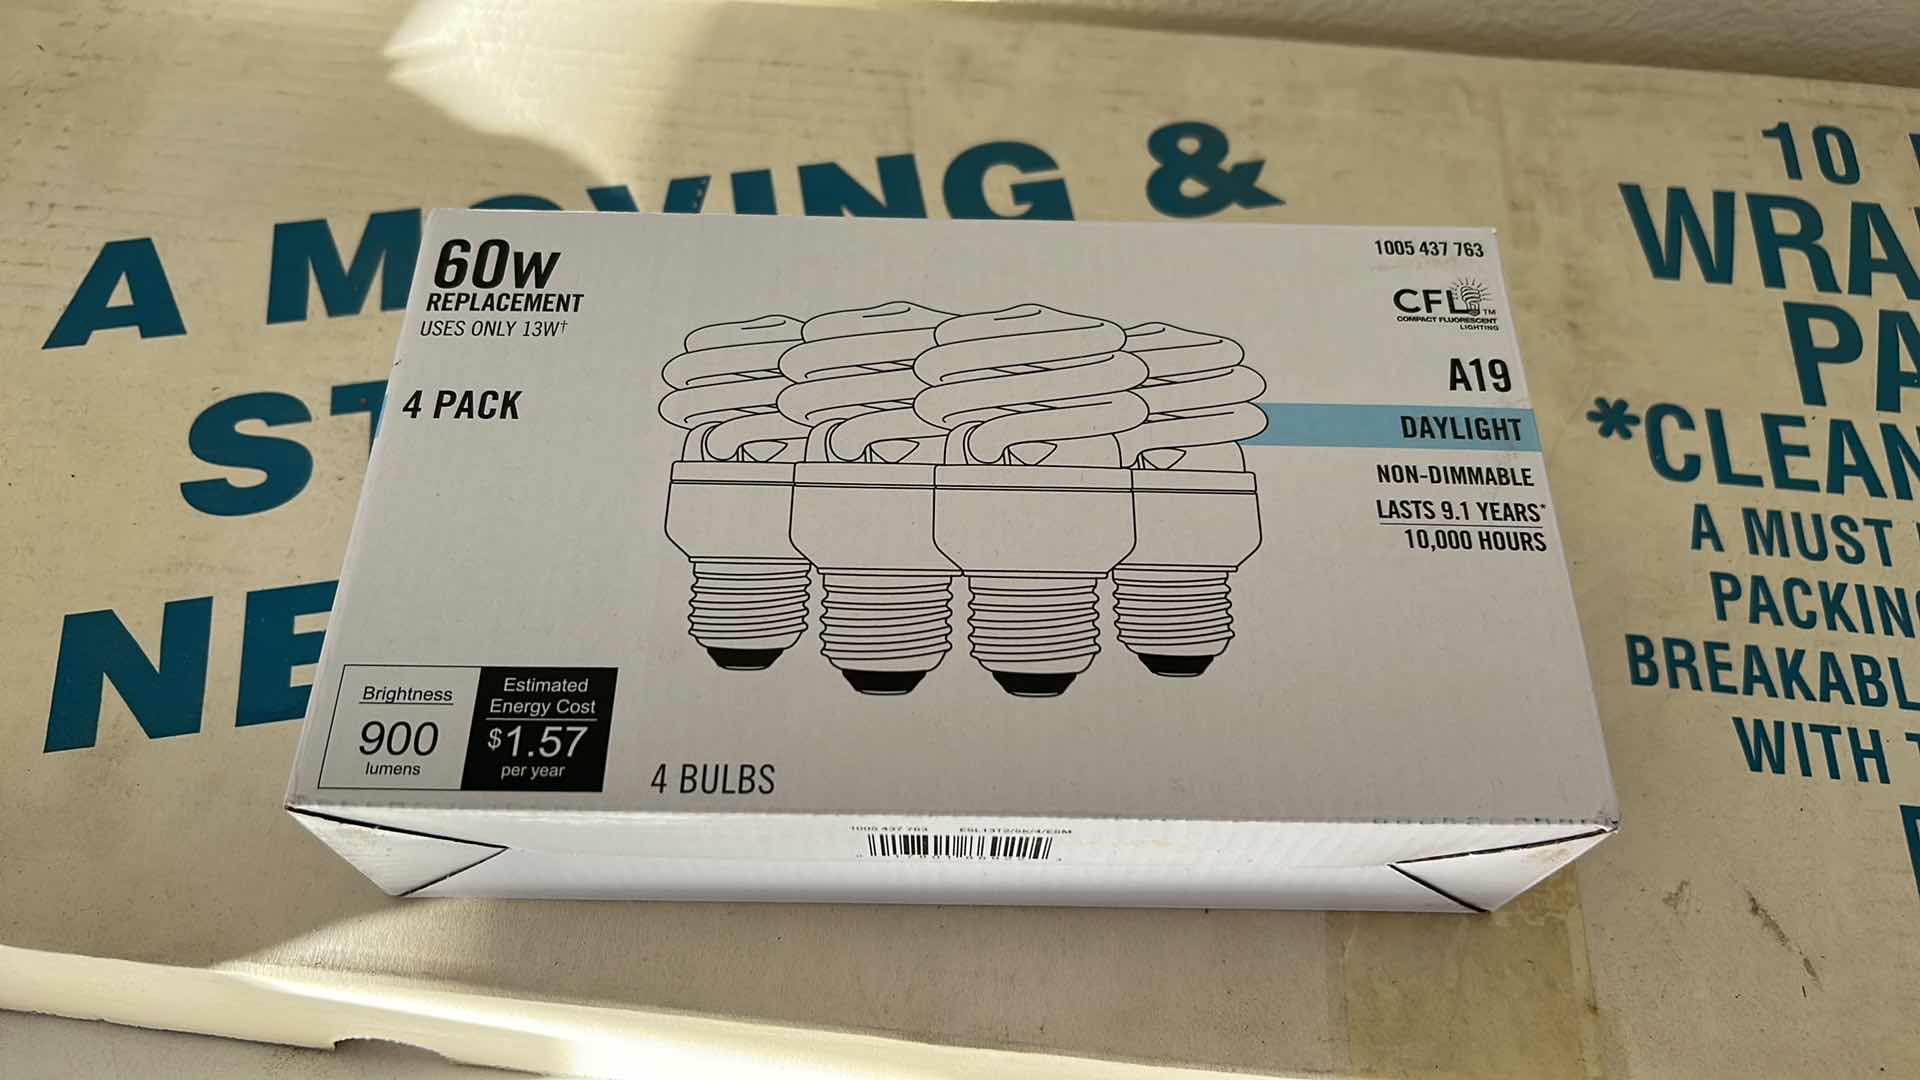 Photo 3 of 10 LBS MOVING WRAPPING PAPER AND 4 PACK 60 WATT BULBS